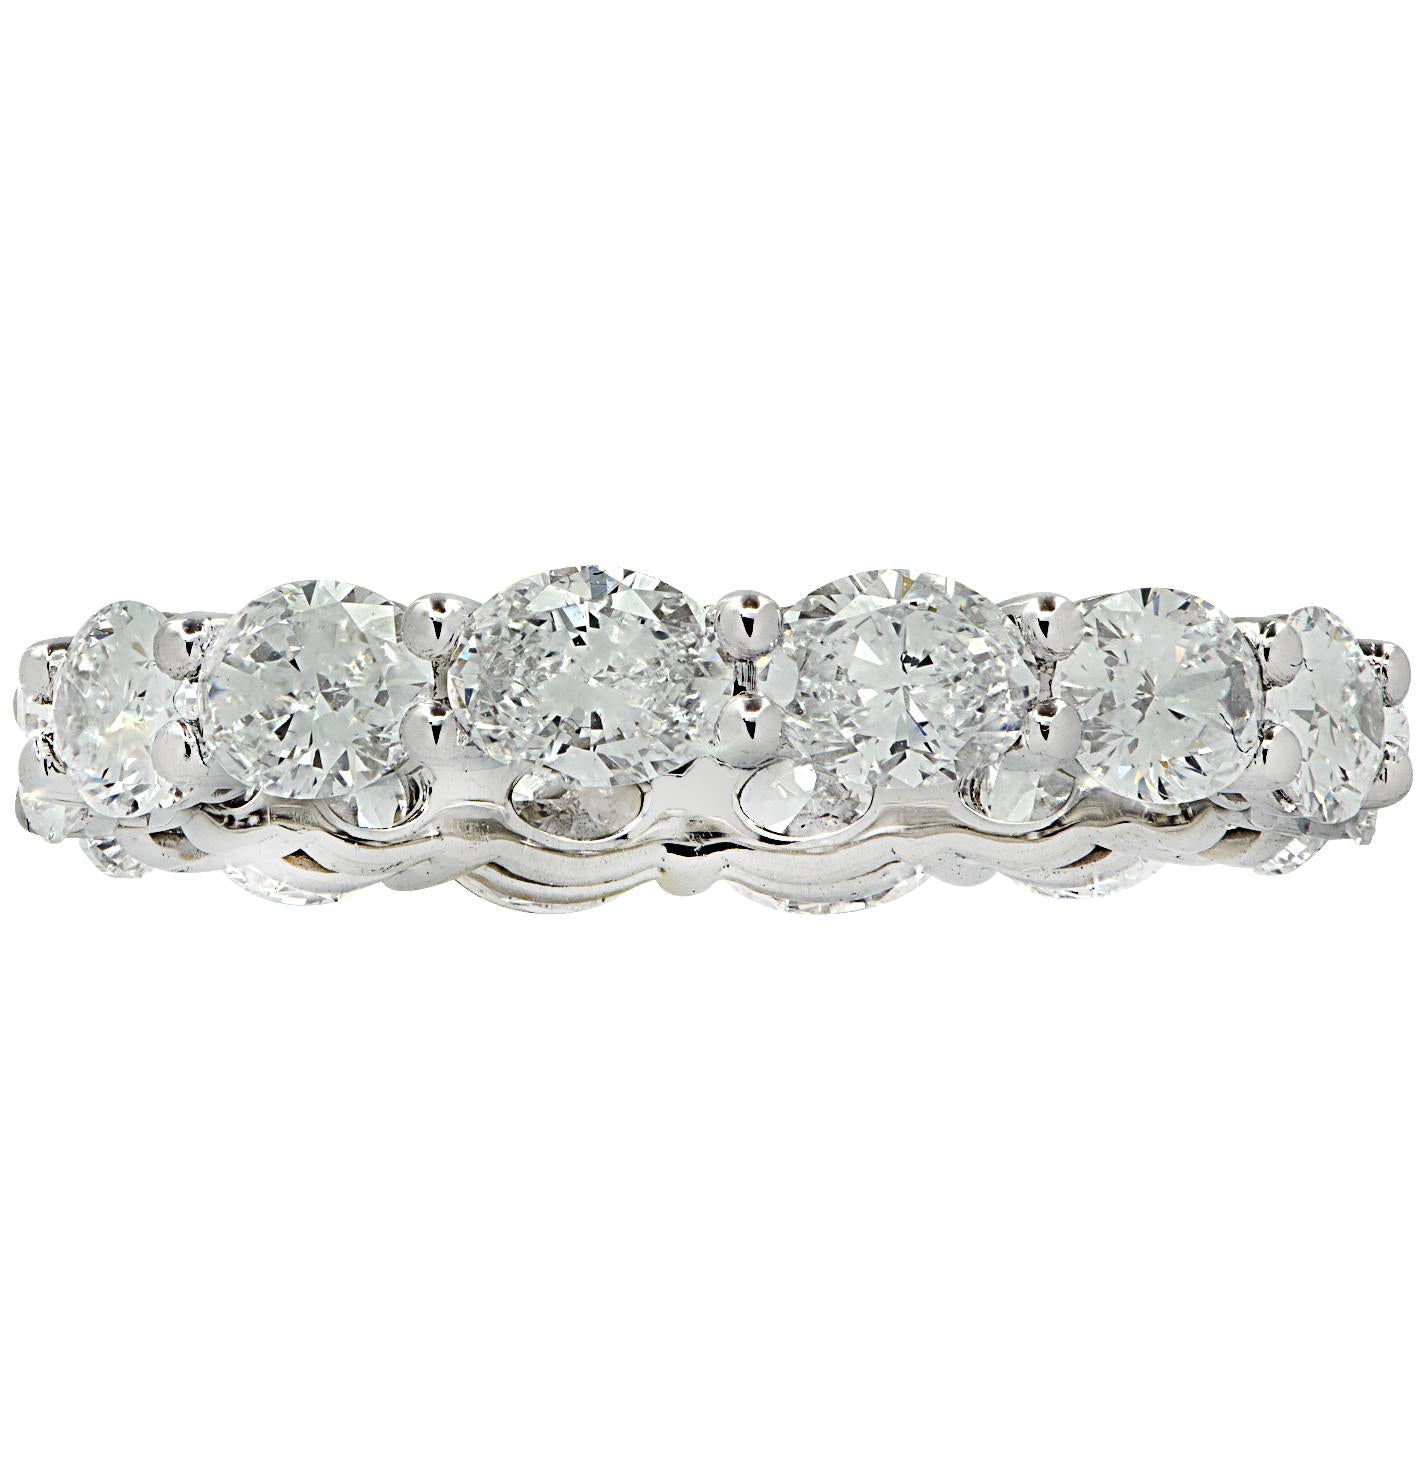 Stunning Vivid Diamonds Eat-West Eternity Band crafted in Platinum, featuring 14 oval cut diamonds weighing 2.62 carats total, D-E color, VVS-VS clarity. These fine diamonds are seamlessly set, east-west, in a modern take on the classic eternity